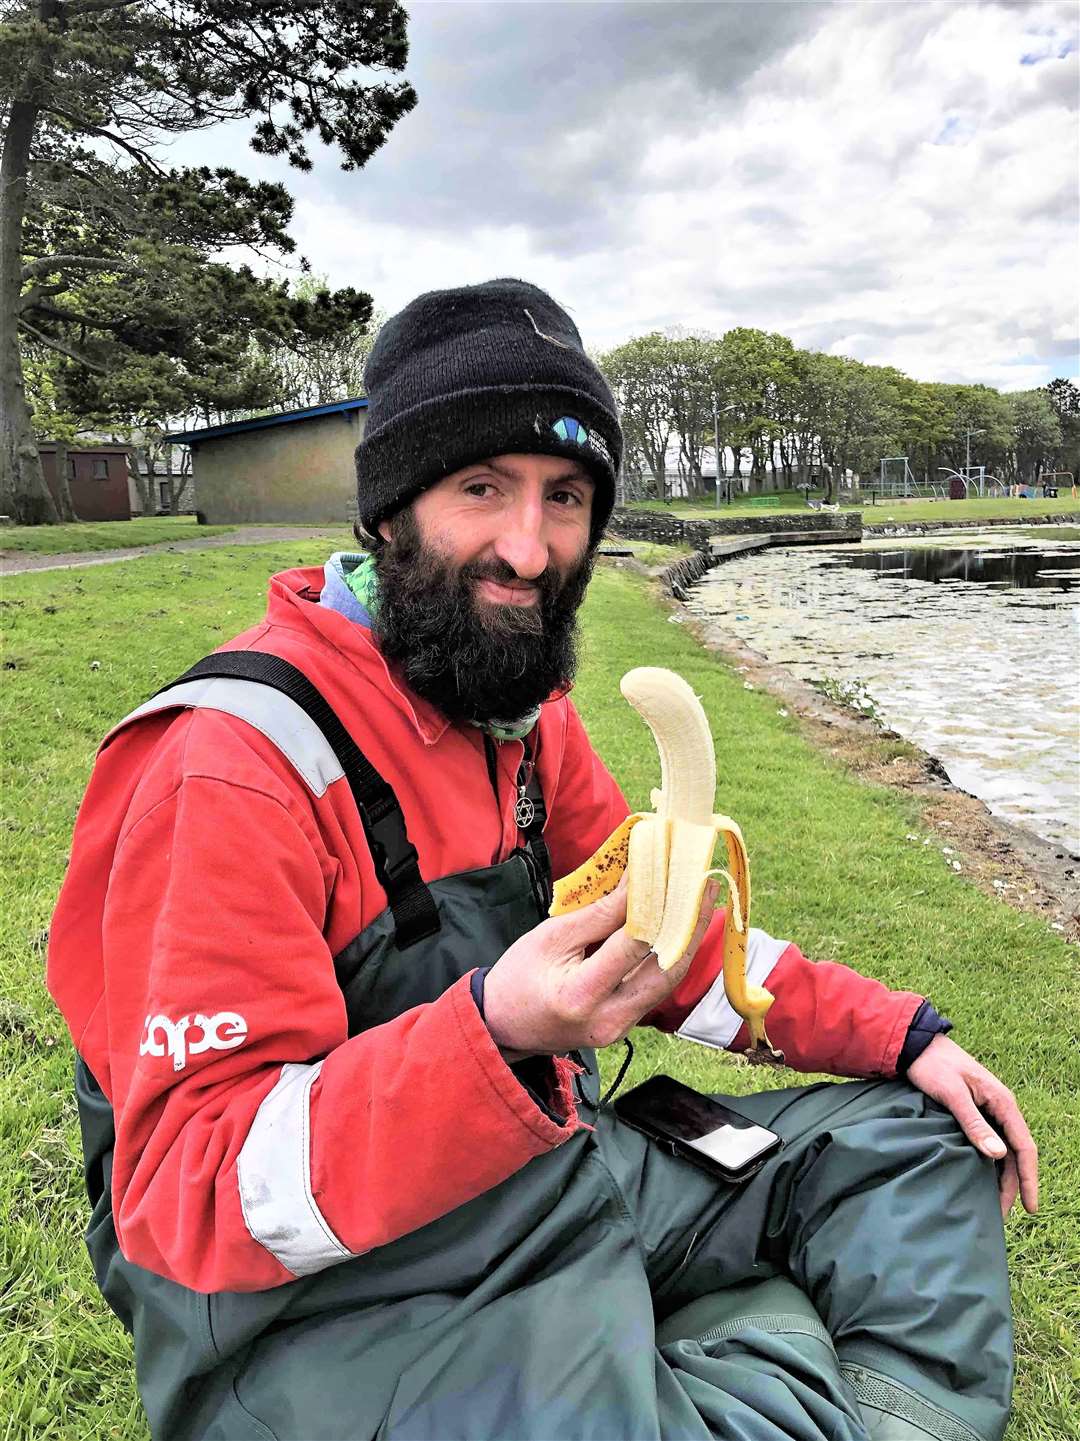 Alexander Glasgow has a snack after helping clear Thurso's boating pond recently. 'People might think I'm bananas but there is a method to it all.' Picture: A Glasgow